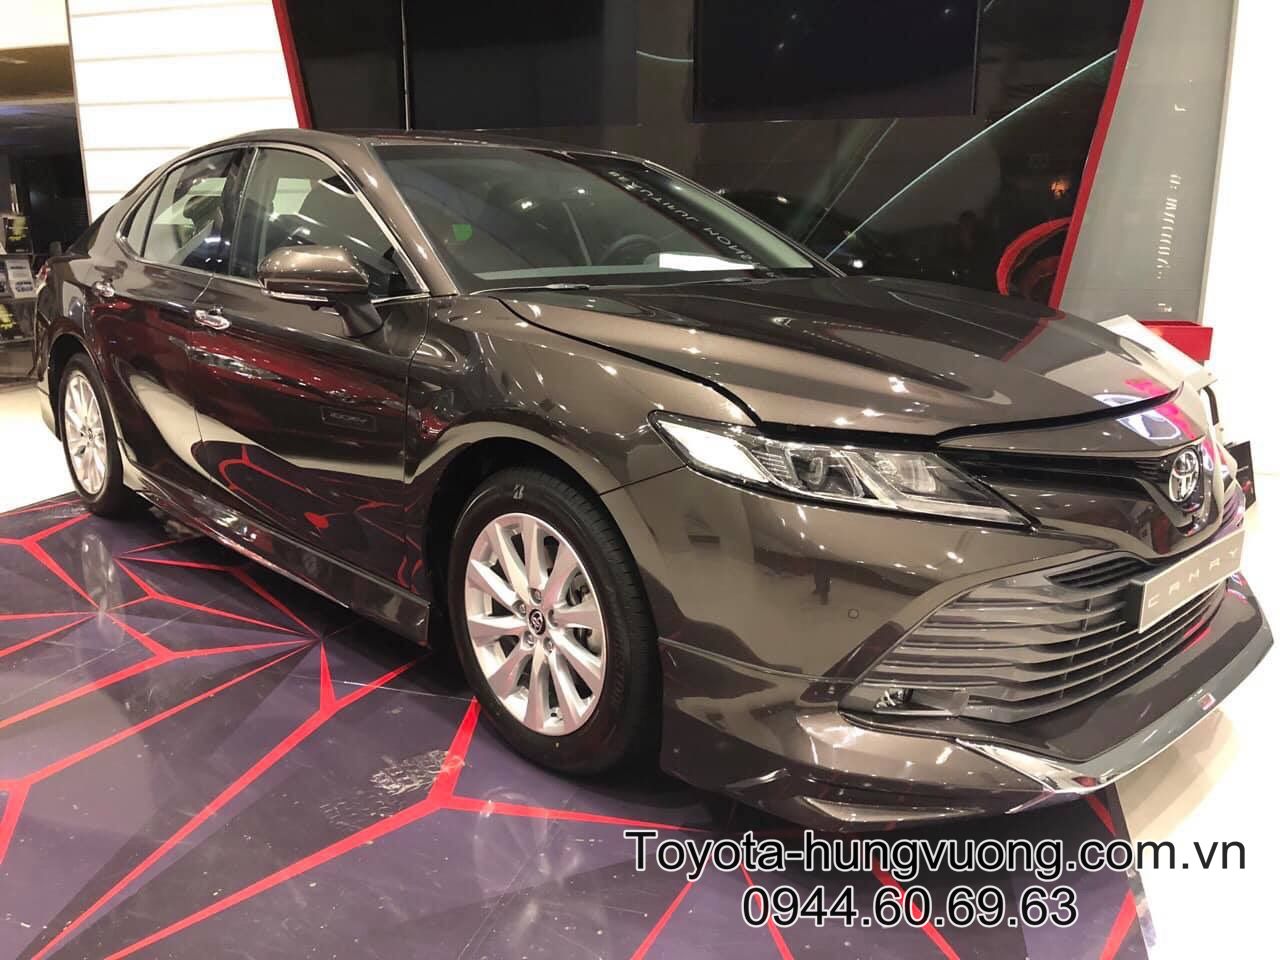 toyota-camry-2020-ghi-4x7